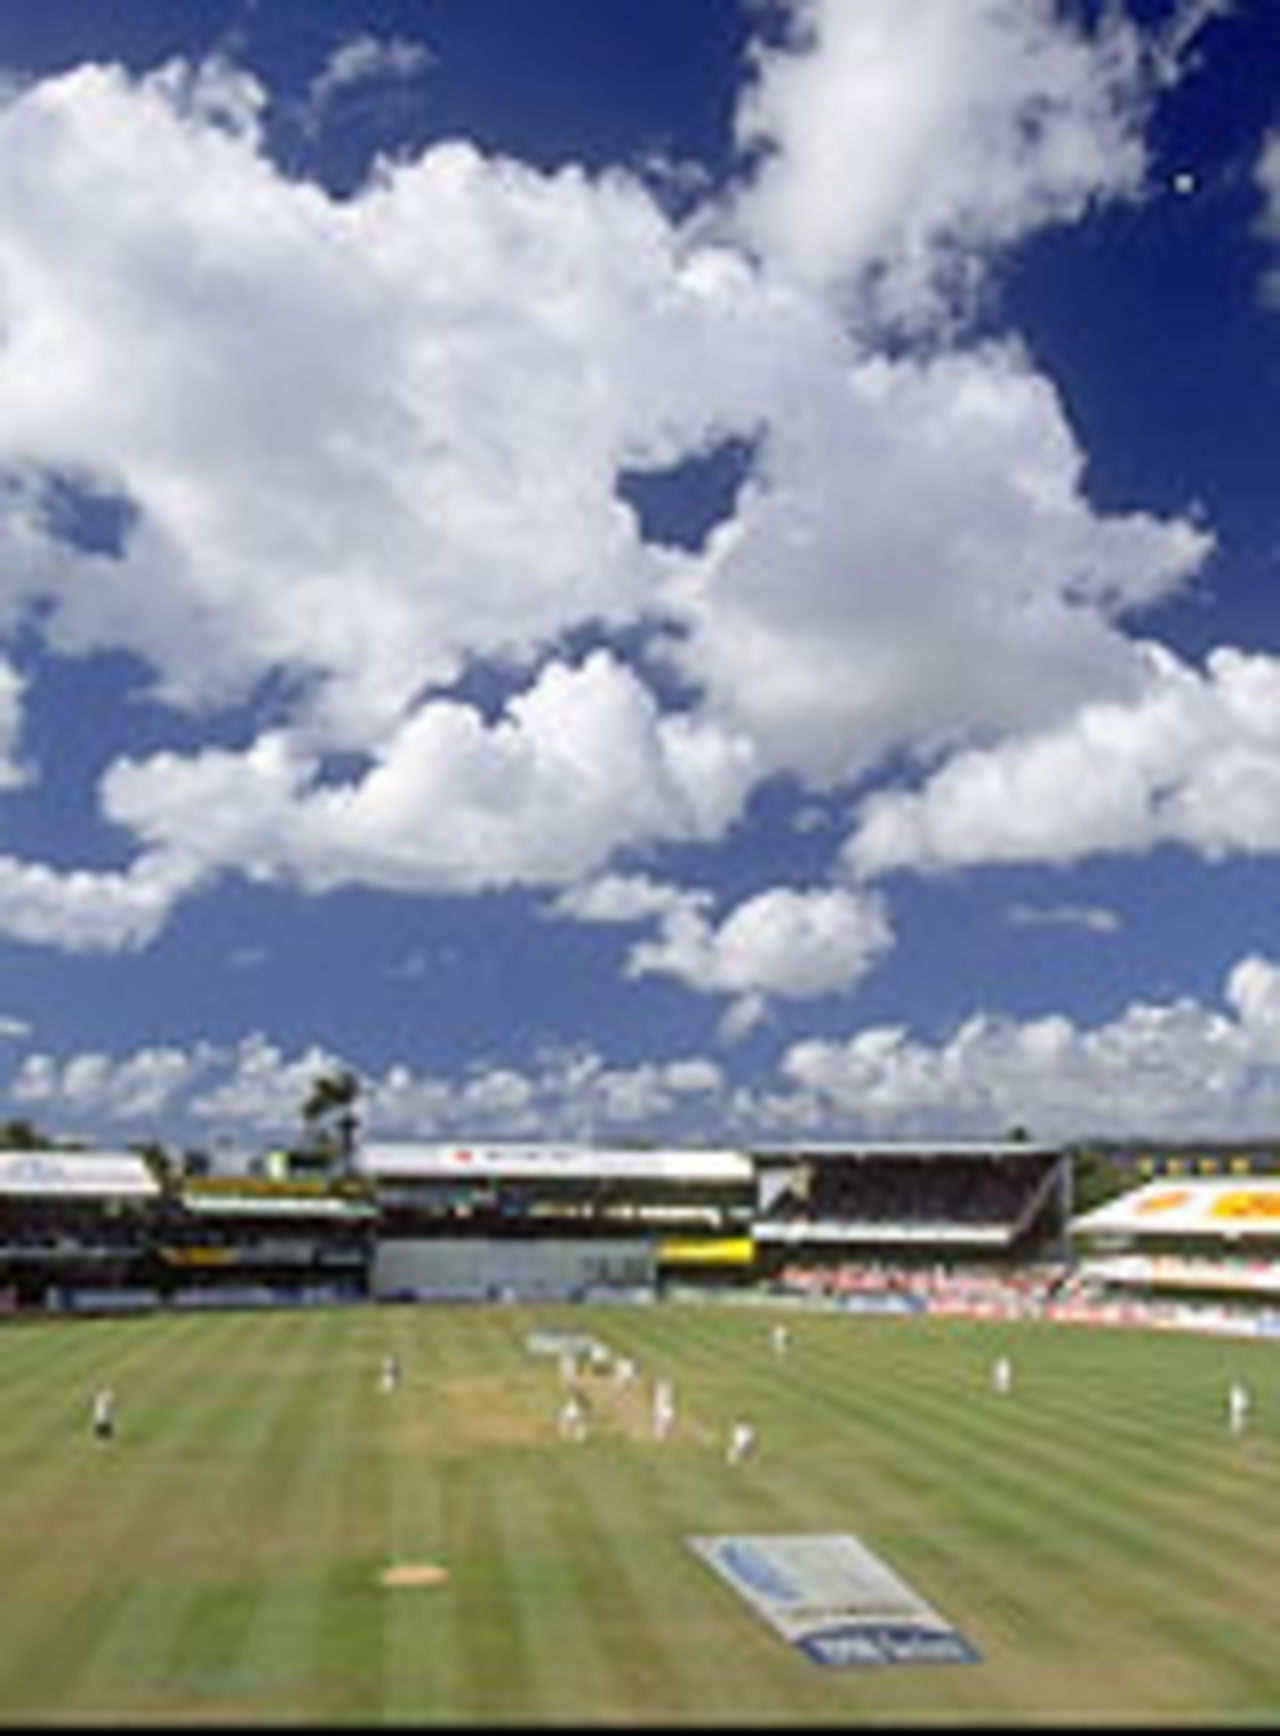 A general view of the Kensington Oval, Barbados, March 15, 1998